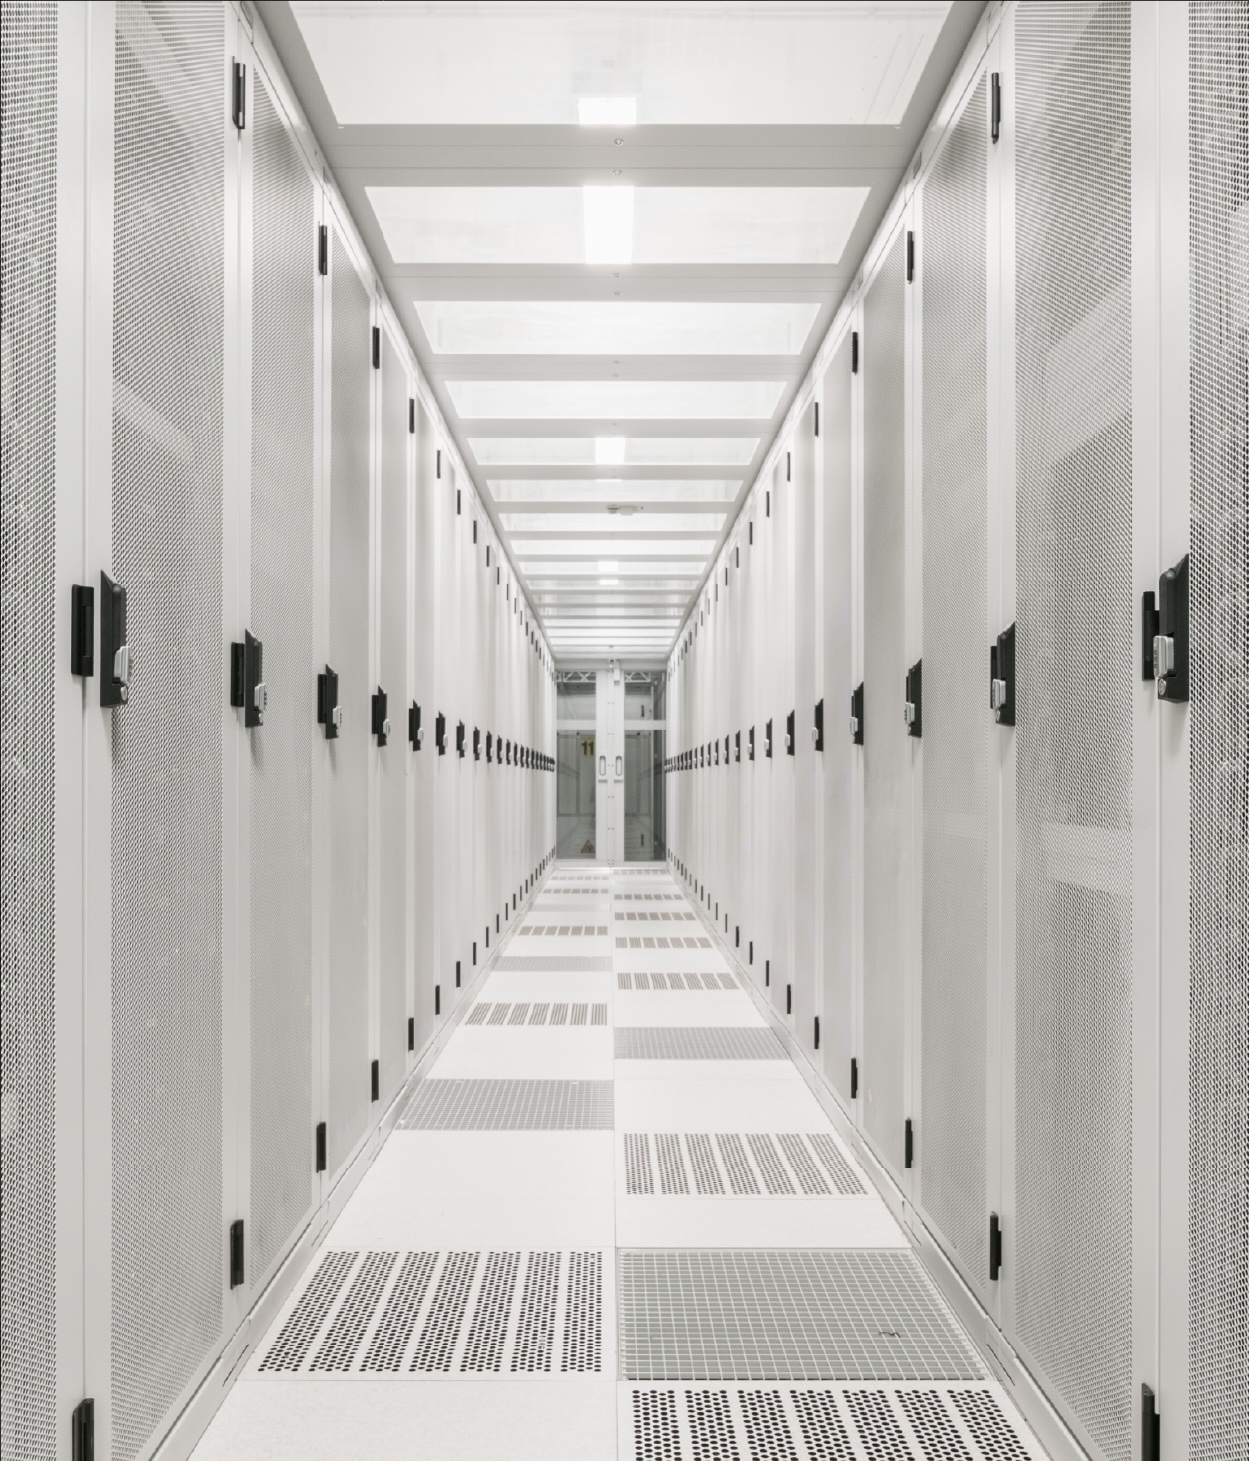 Aisle in a server room with caged server racks on either side.